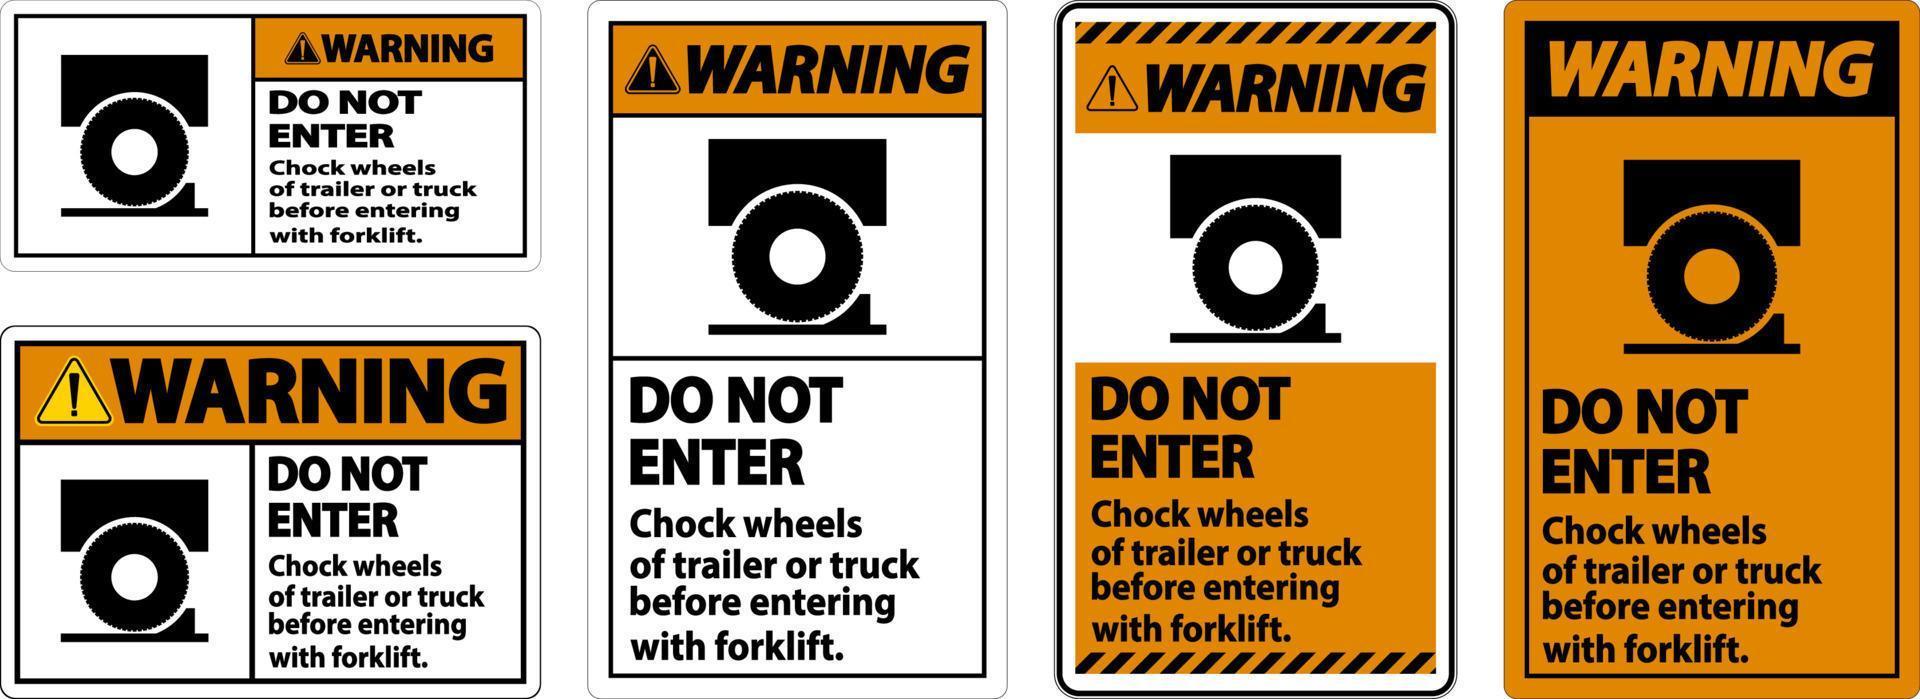 Warning Chock Wheels of Trailer Sign On White Background vector